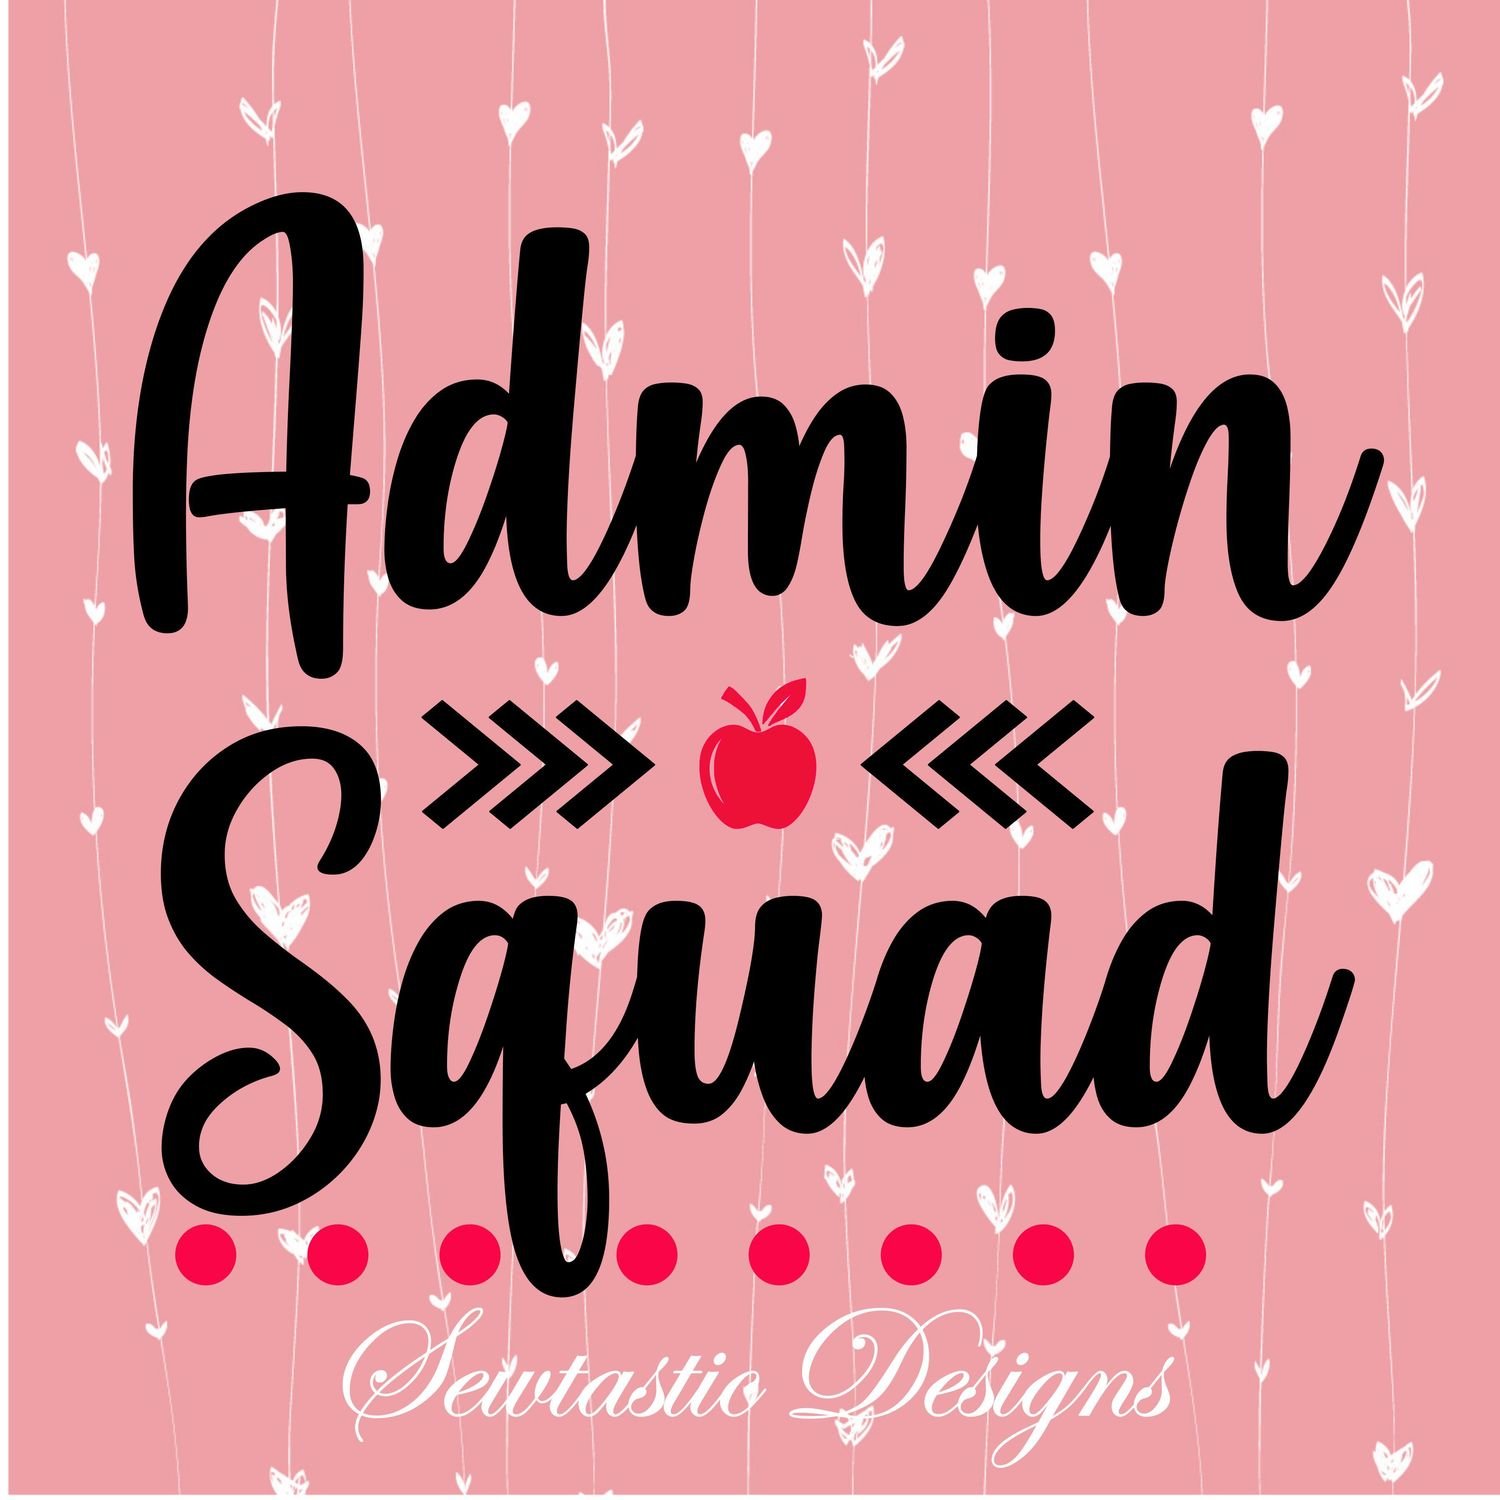 Admin Squad SVG, Administration SVG, Squad SVG, Admin SVG, Cut File, Iron On, Decal, Cricut, Silhouette, ScanNCut &amp; Many More